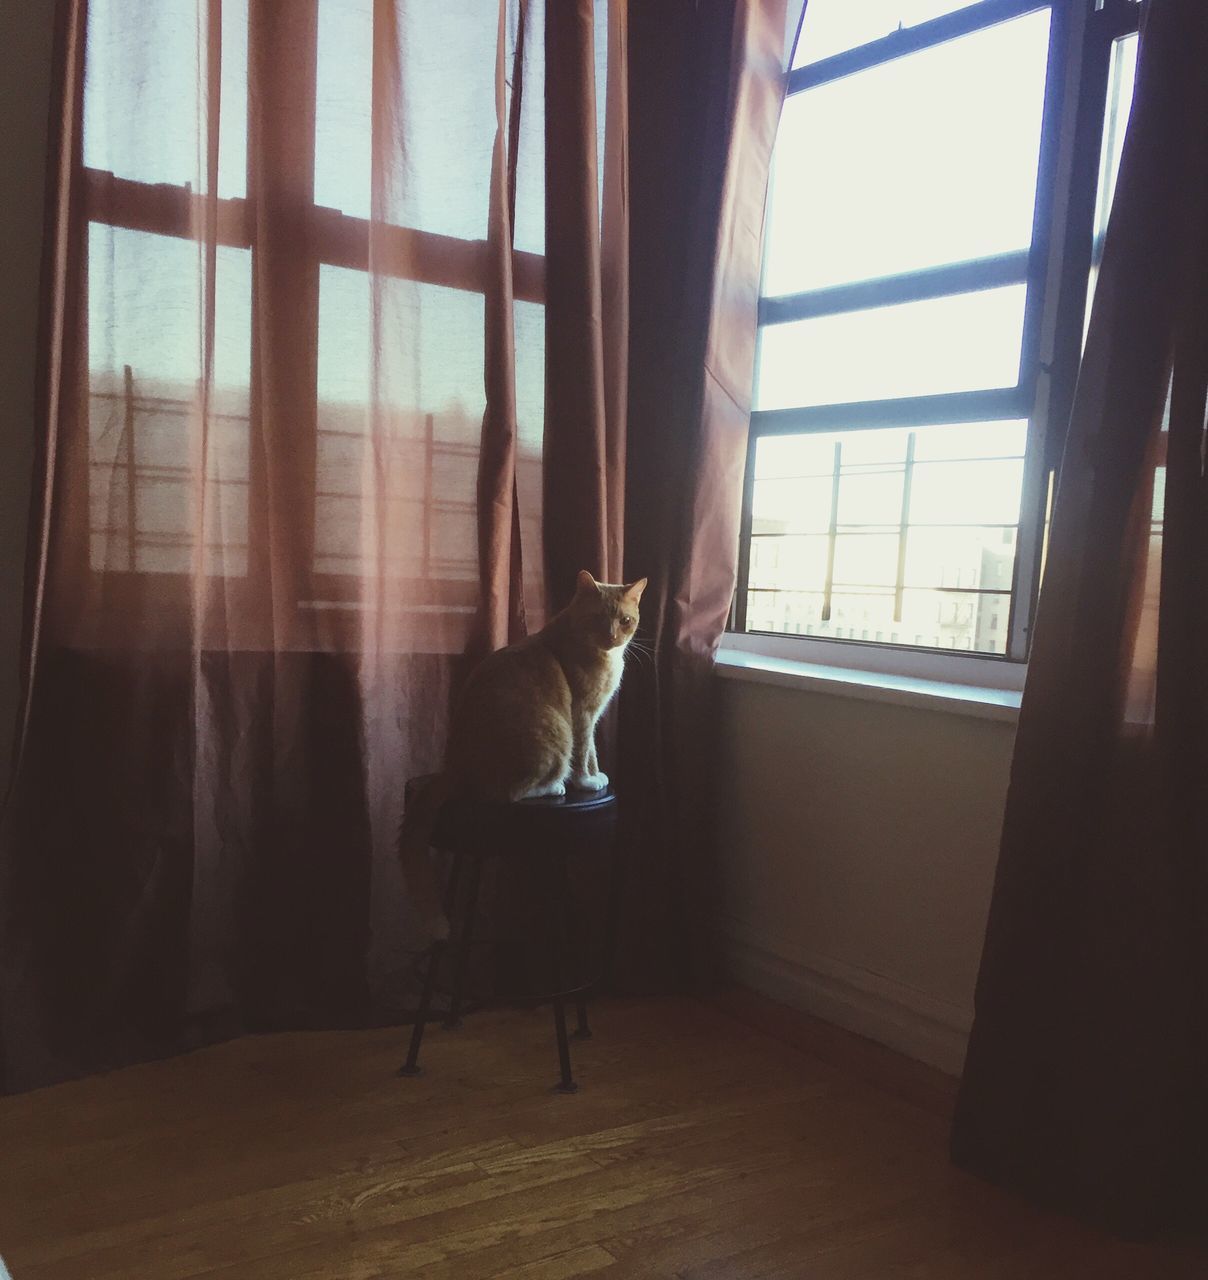 window, pets, domestic cat, curtain, domestic animals, one animal, indoors, feline, animal themes, mammal, cat, drapes, home interior, dog, full length, no people, day, siamese cat